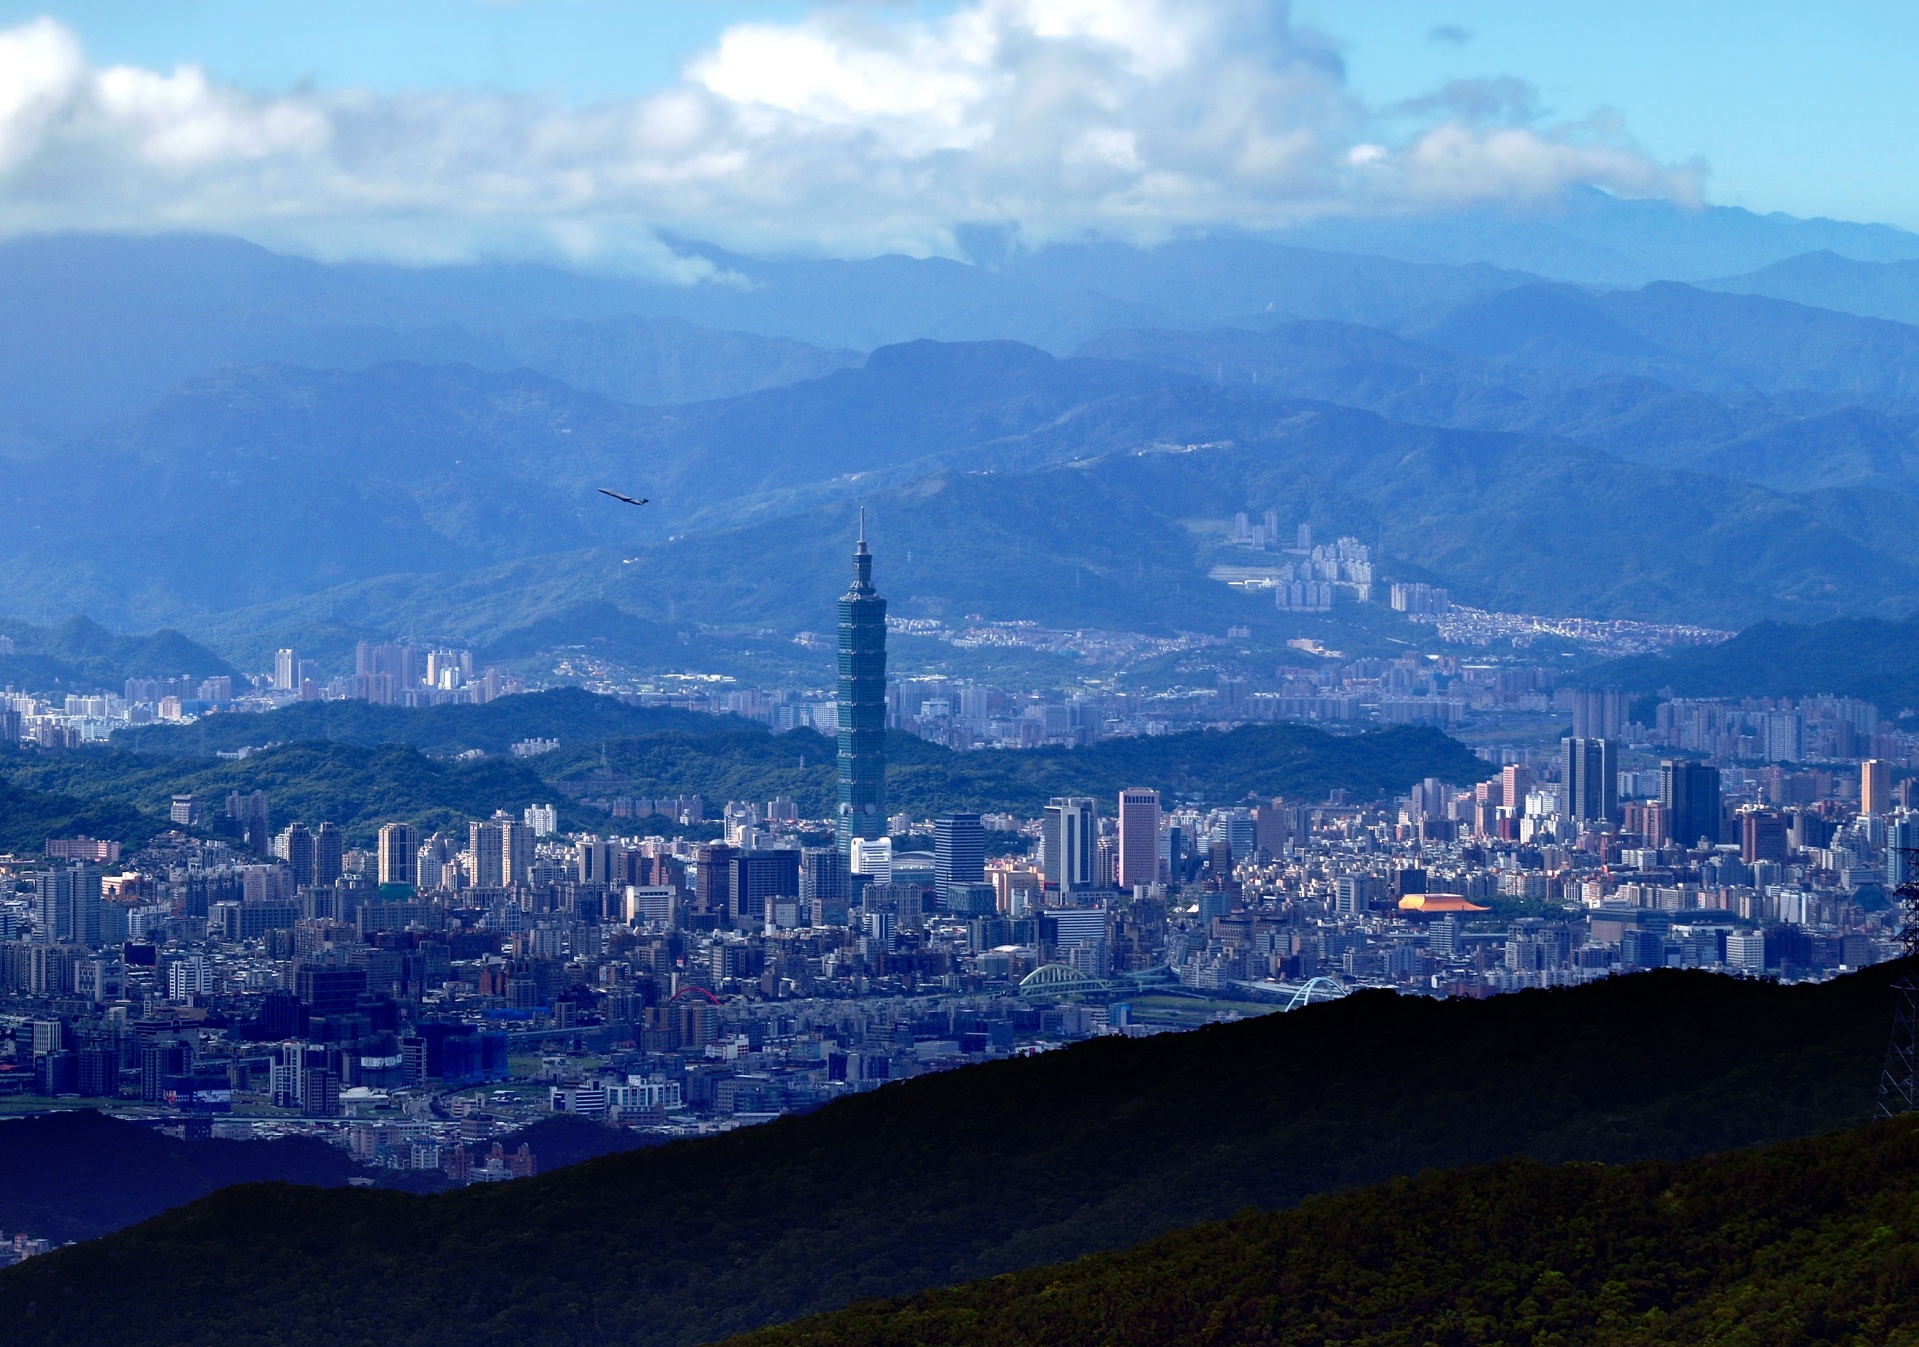 Aerial view of the eastern half of Taipei city, Taiwan, as seen from a mountaintop to the north